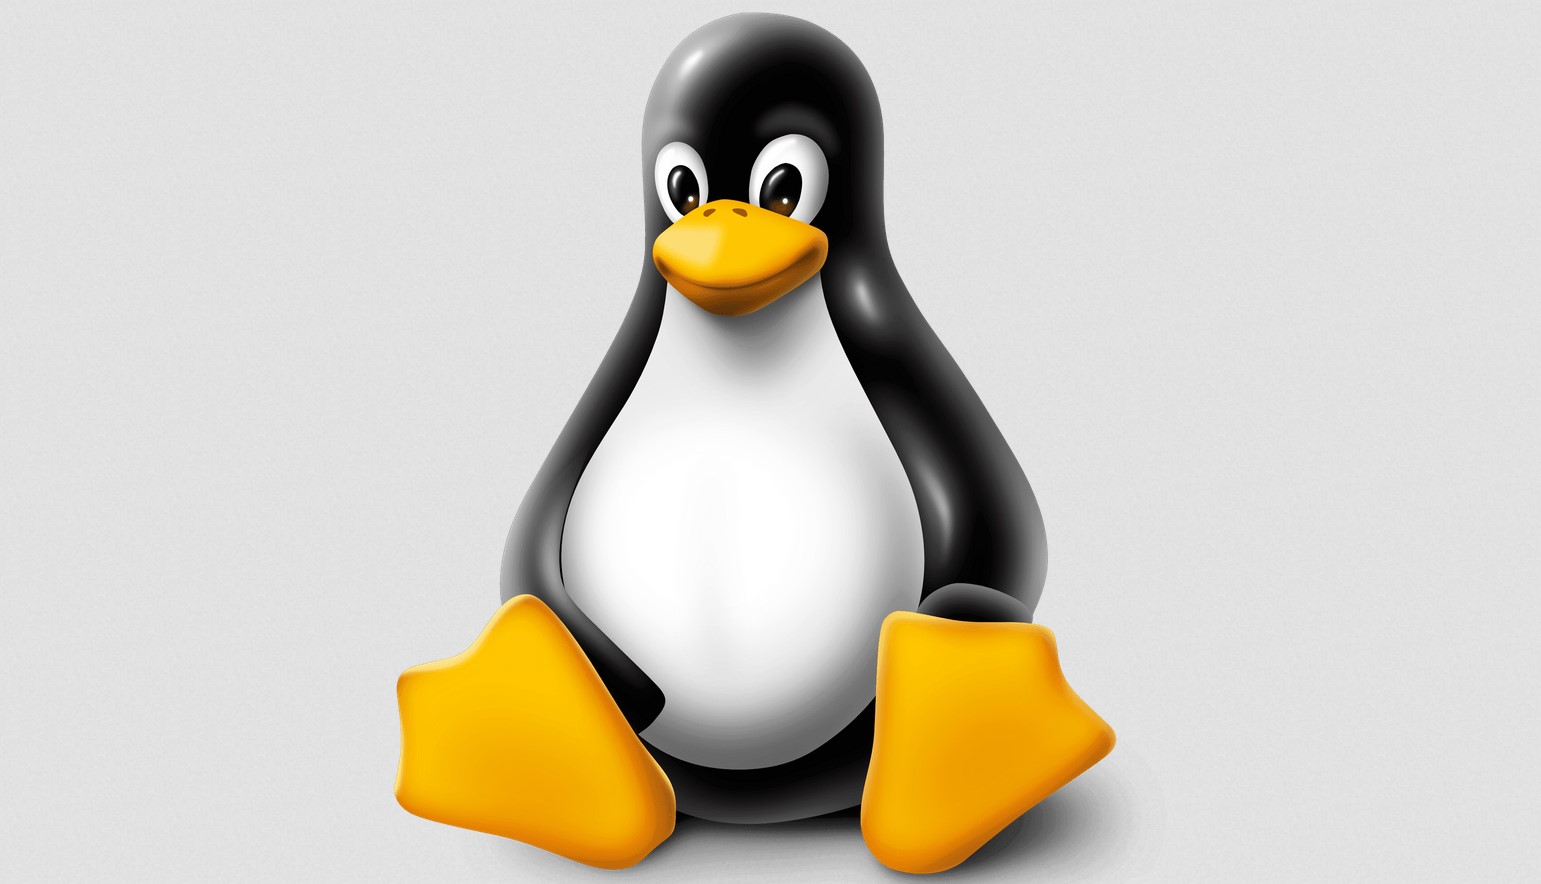 10 Best Linux Command for Beginners to Learn in 2022